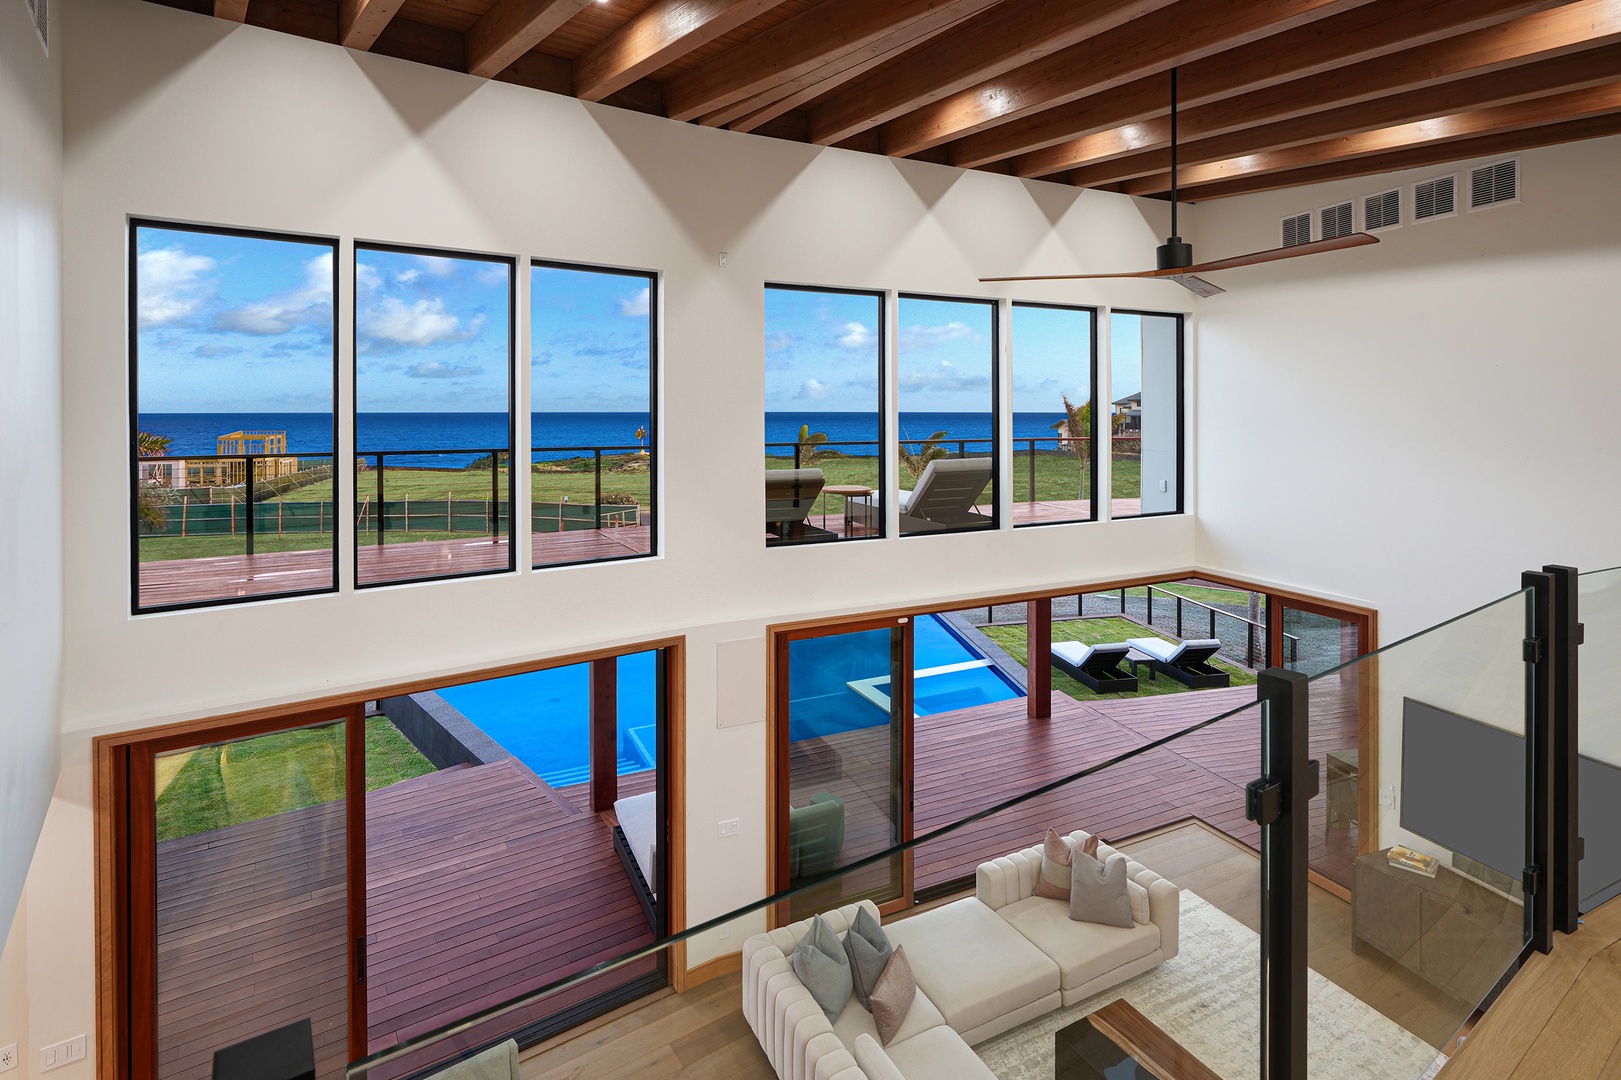 Koloa Vacation Rentals, Hale Makau - Enjoy the ocean views from the spacious living area, with floor-to-ceiling windows and easy access to the outdoor pool and lanai.